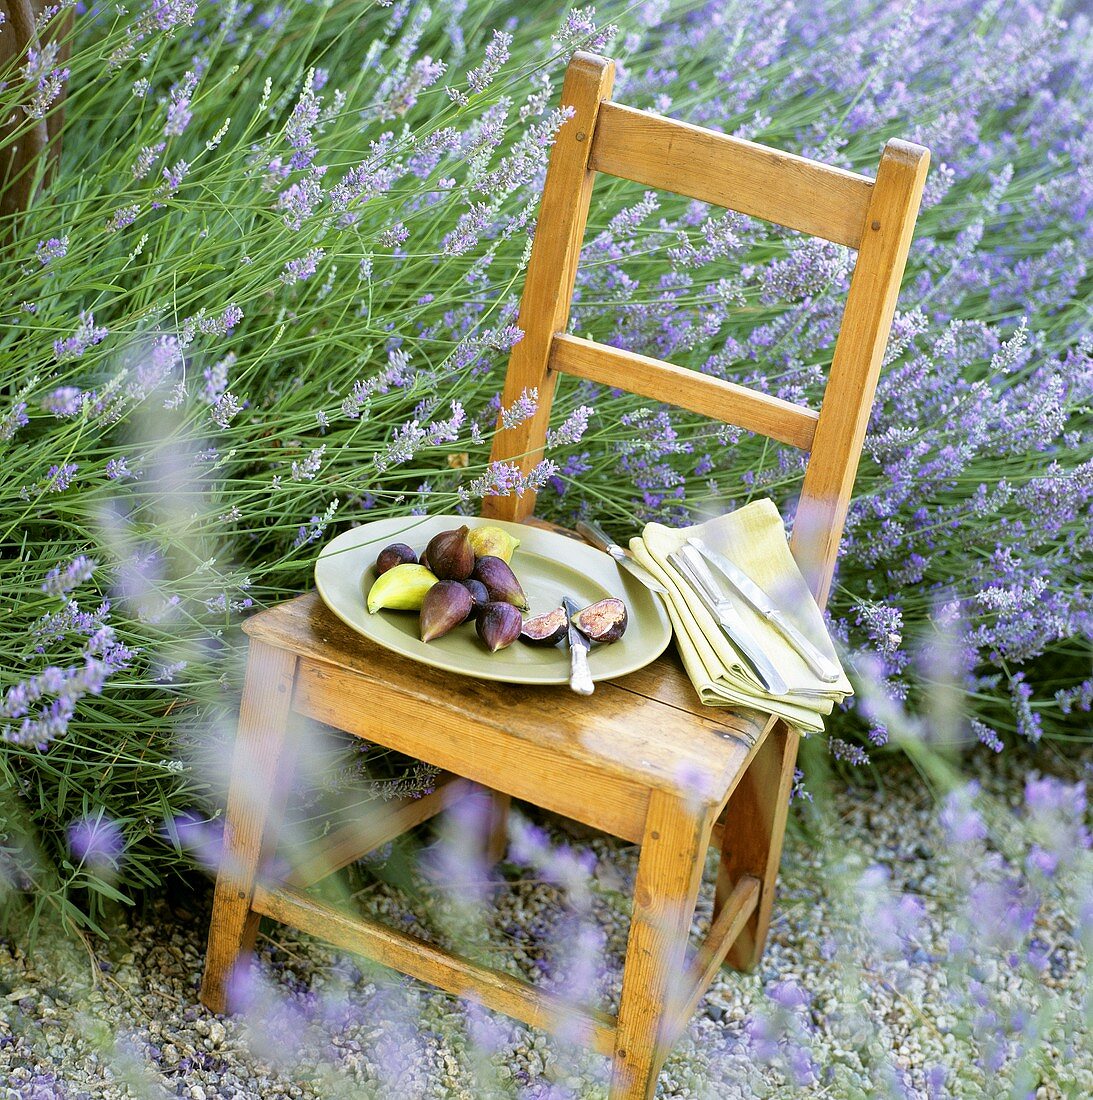 Fresh figs on wooden chair in a lavender field